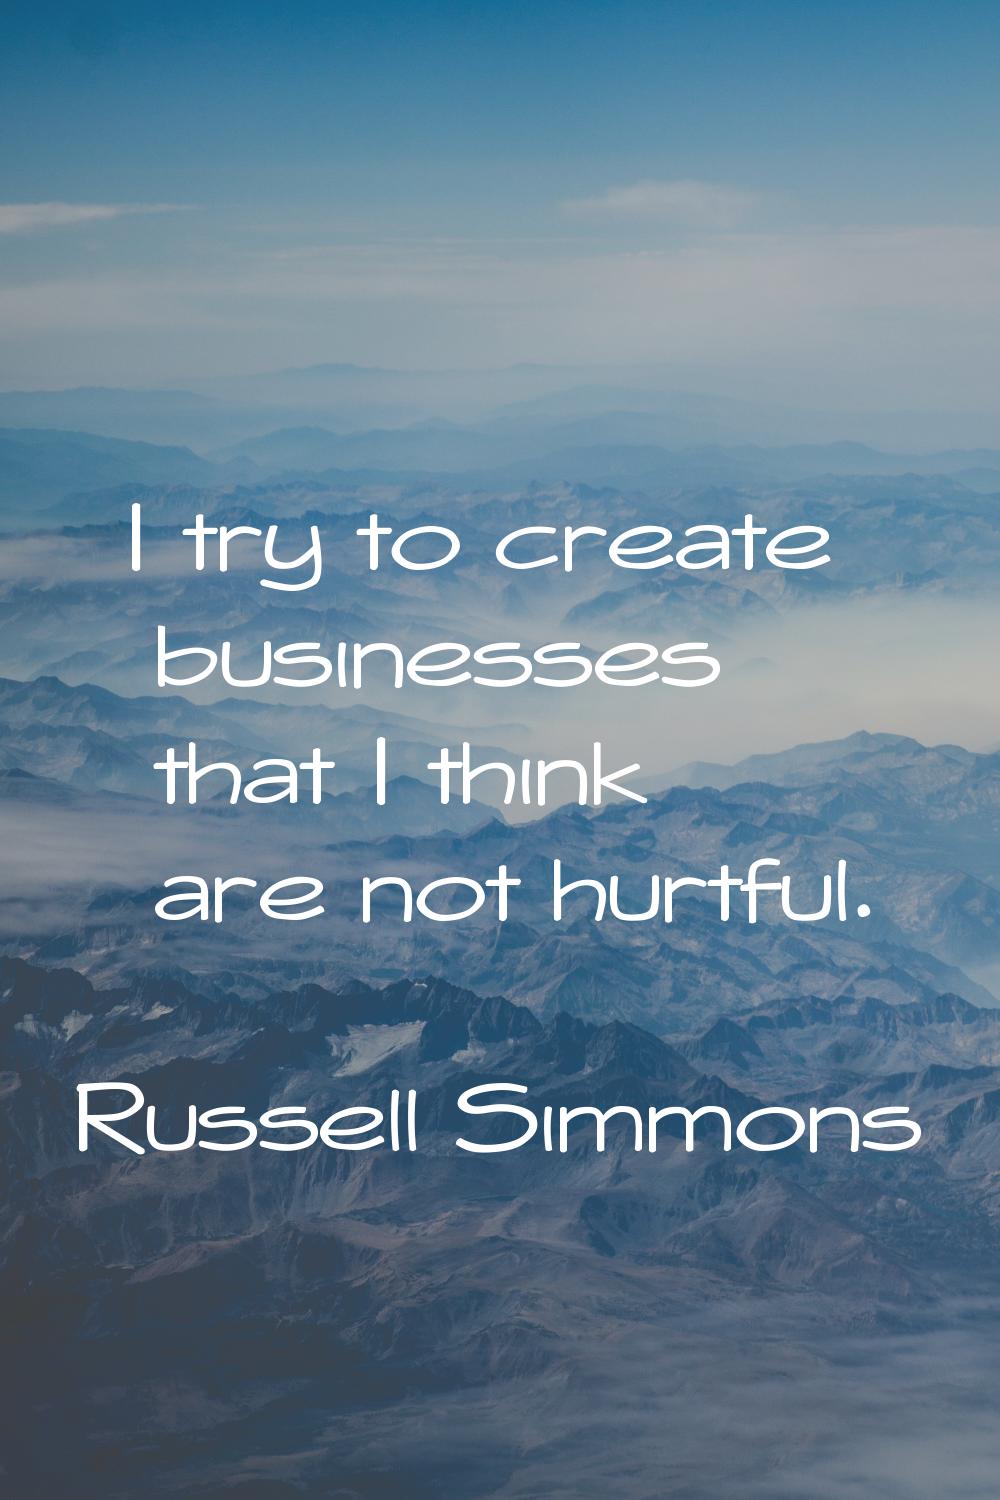 I try to create businesses that I think are not hurtful.